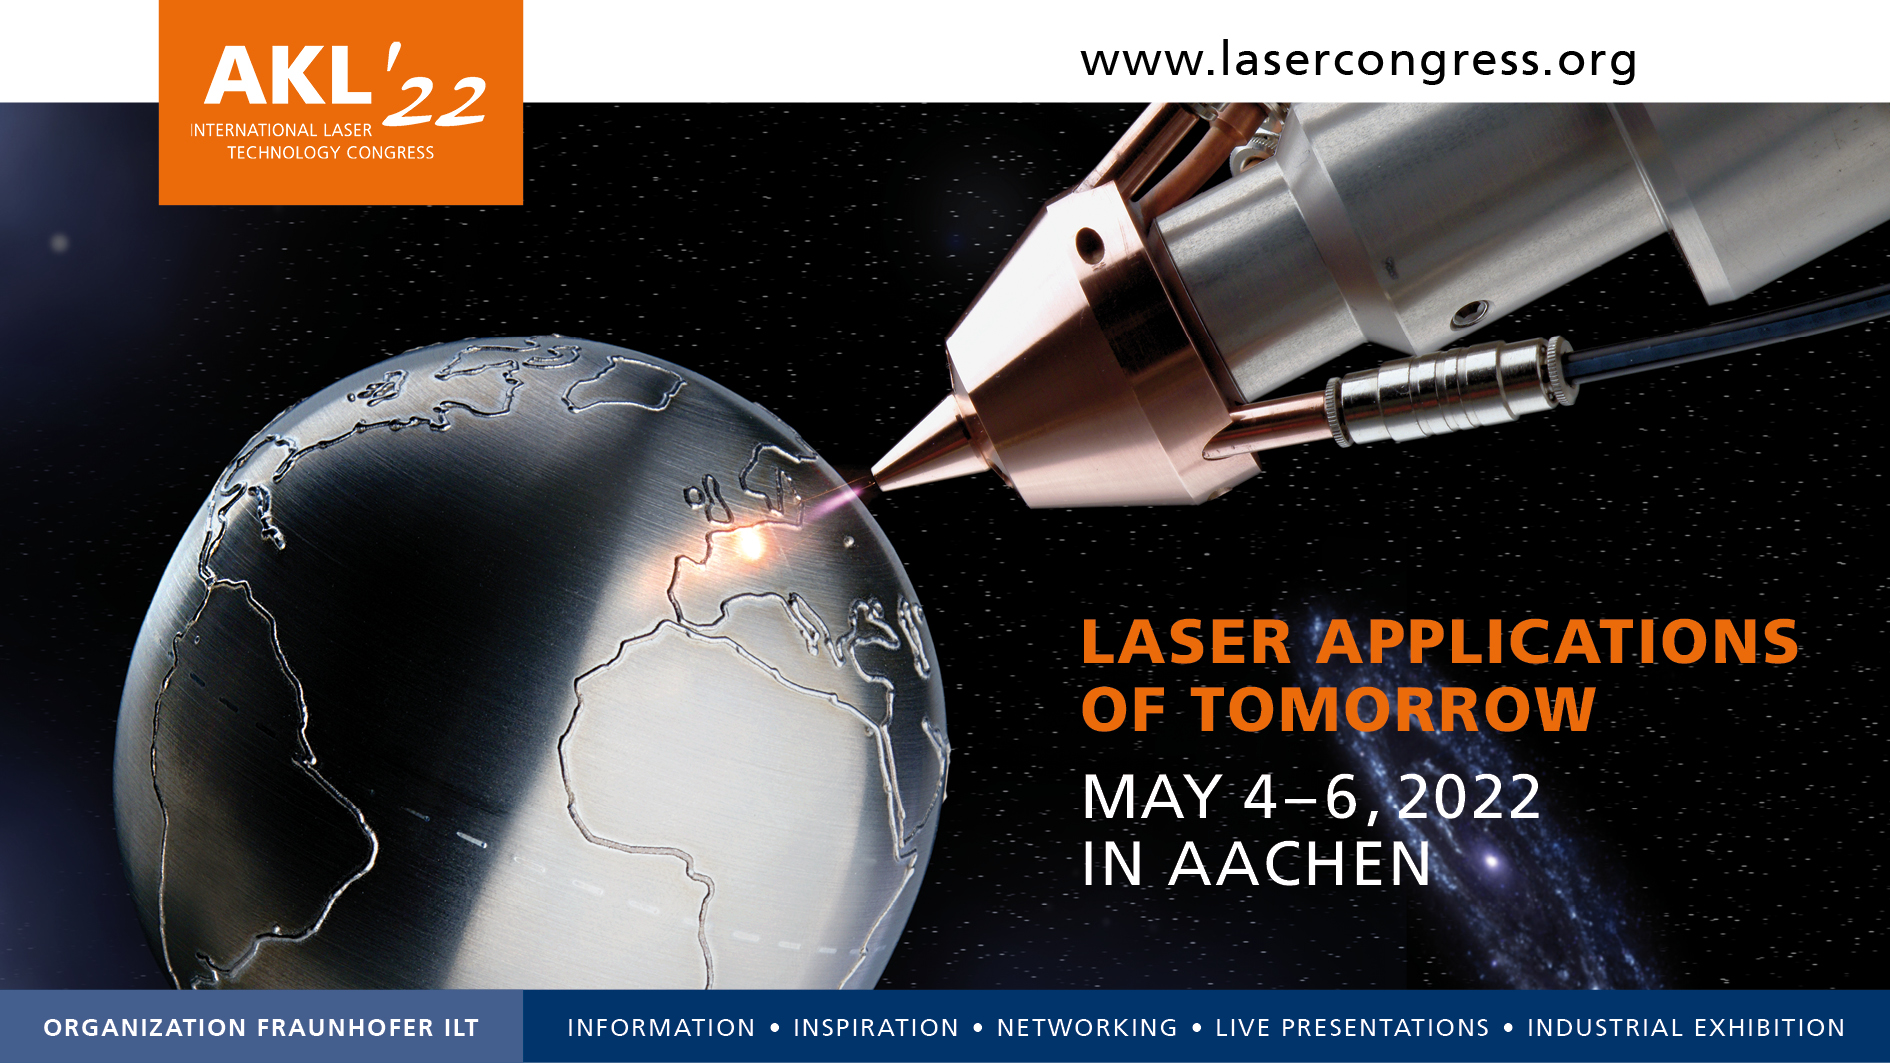 AKL'22 – the comprehensive insight into the world of laser technology at the intersection of business and science.